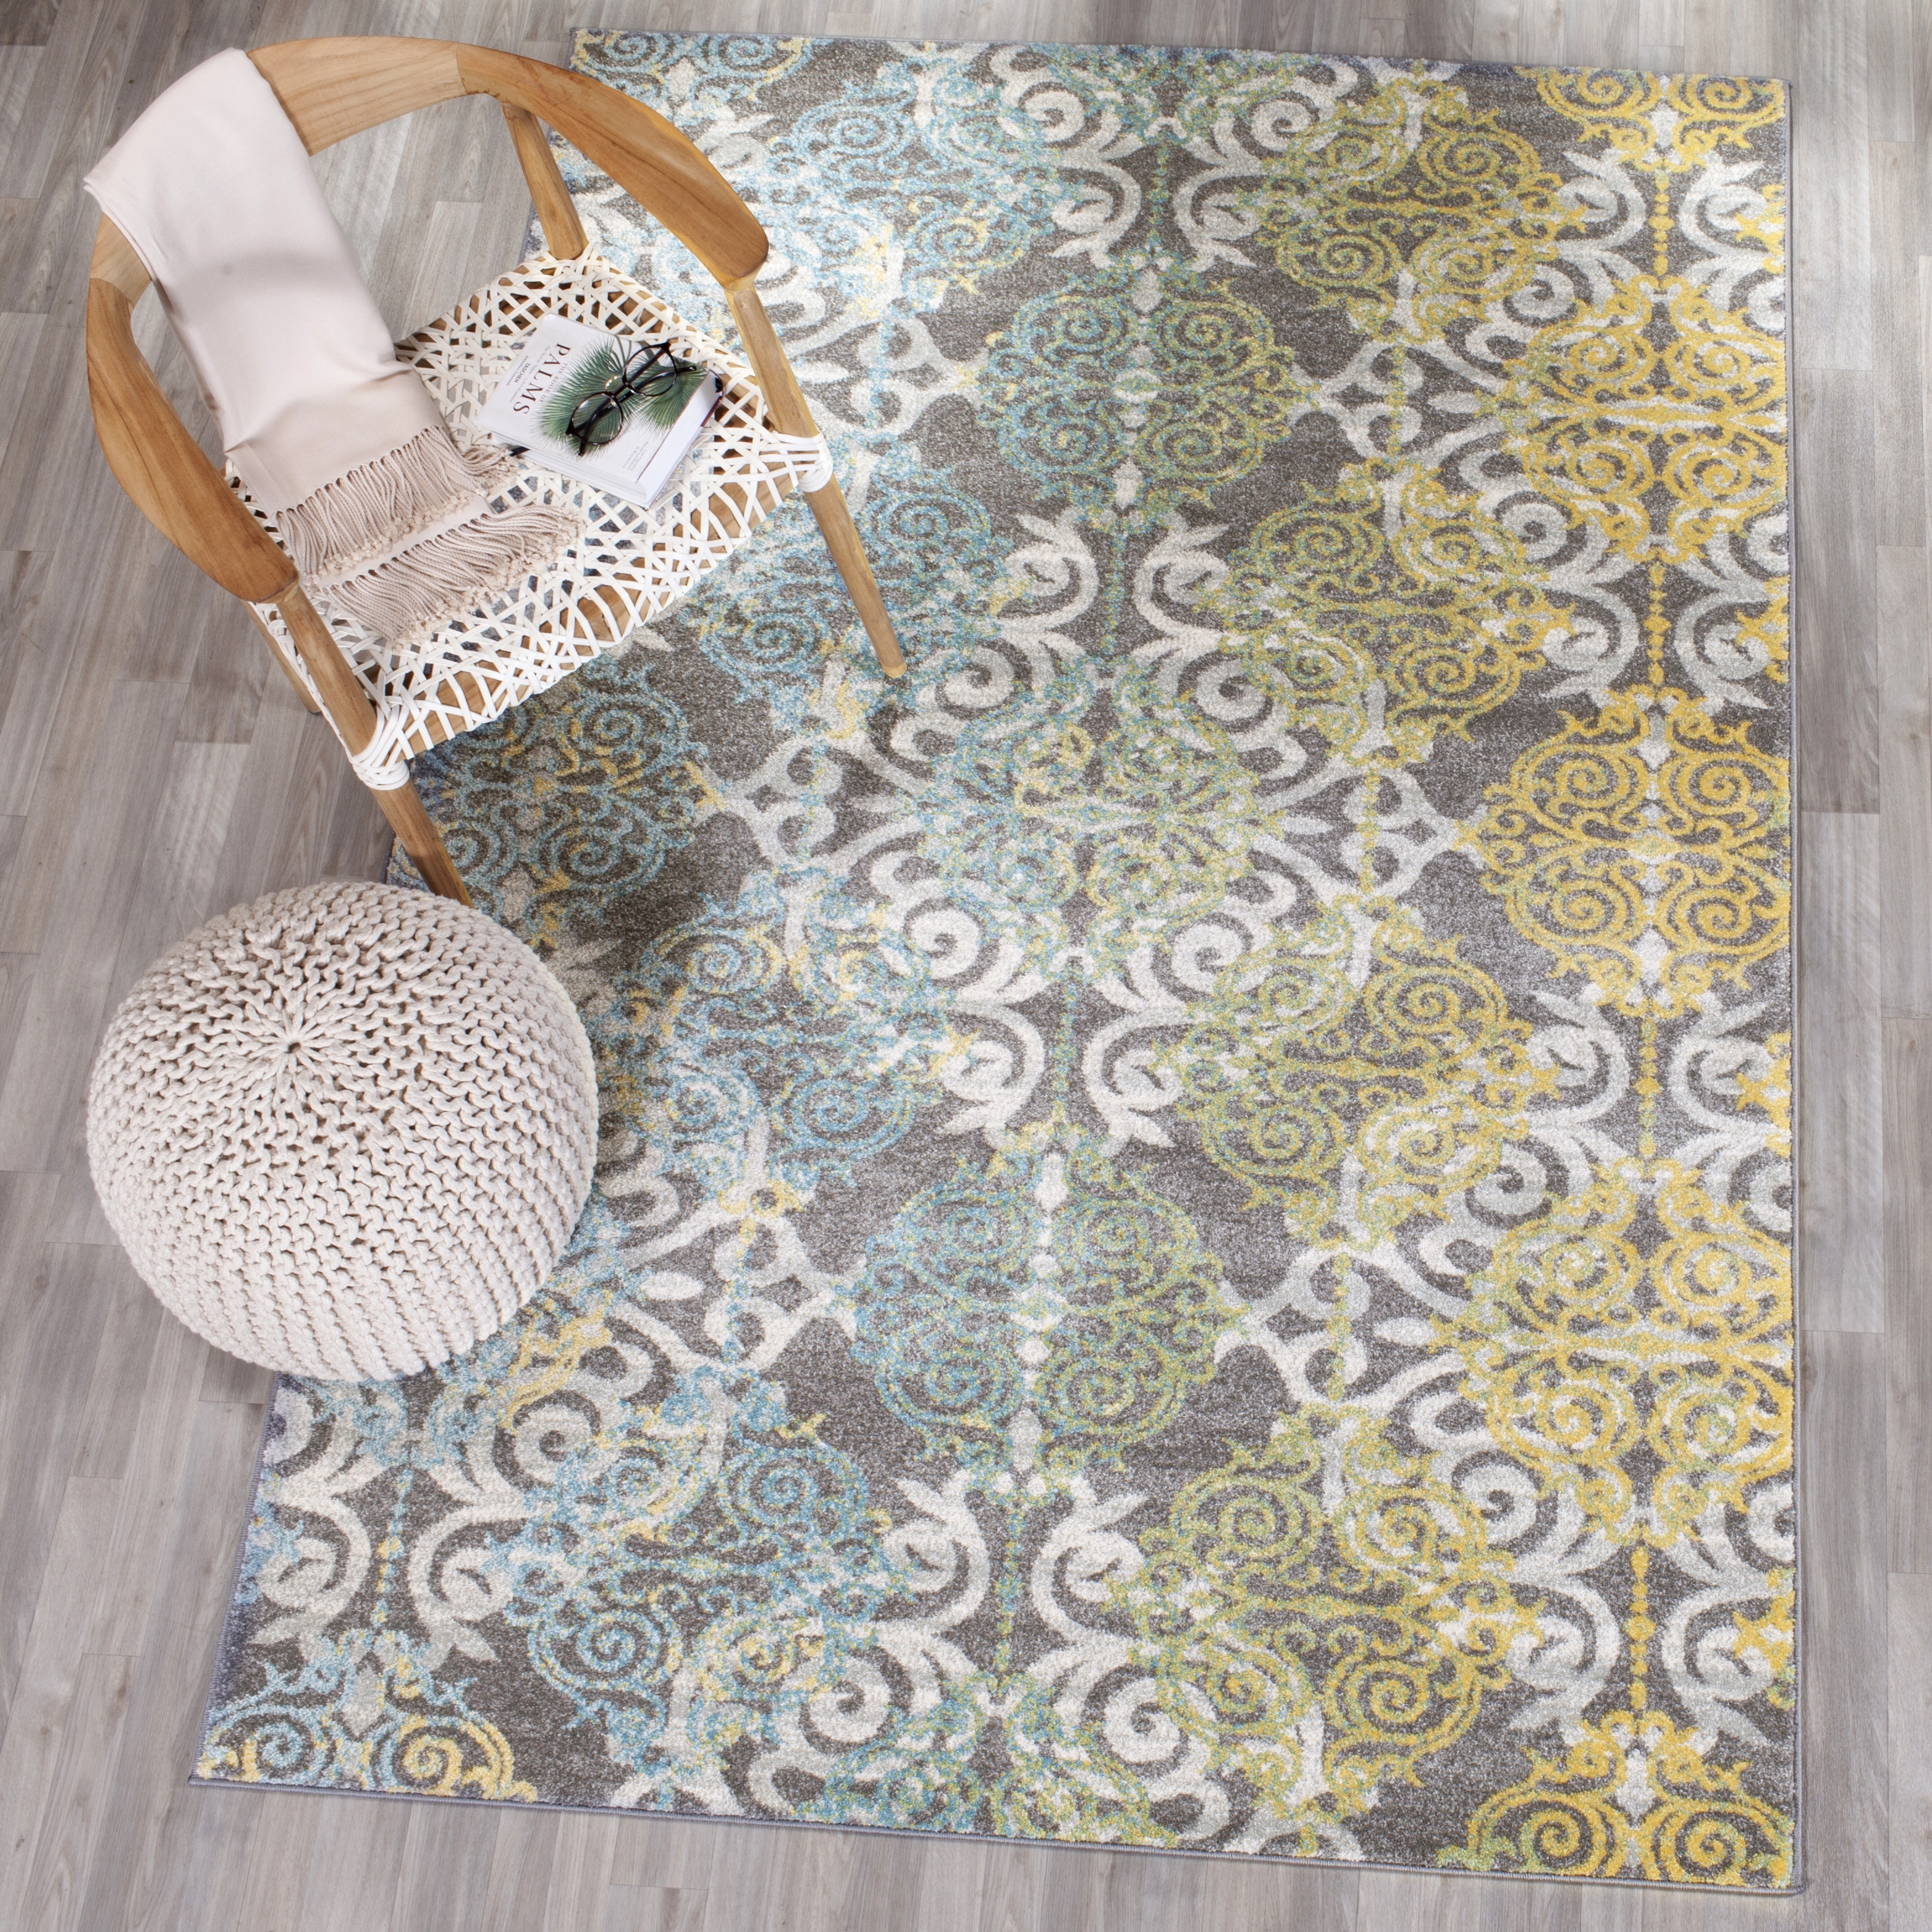 Arlo Home Woven Area Rug, EVK230D, Grey/Ivory,  6' 7" X 9' - Image 1